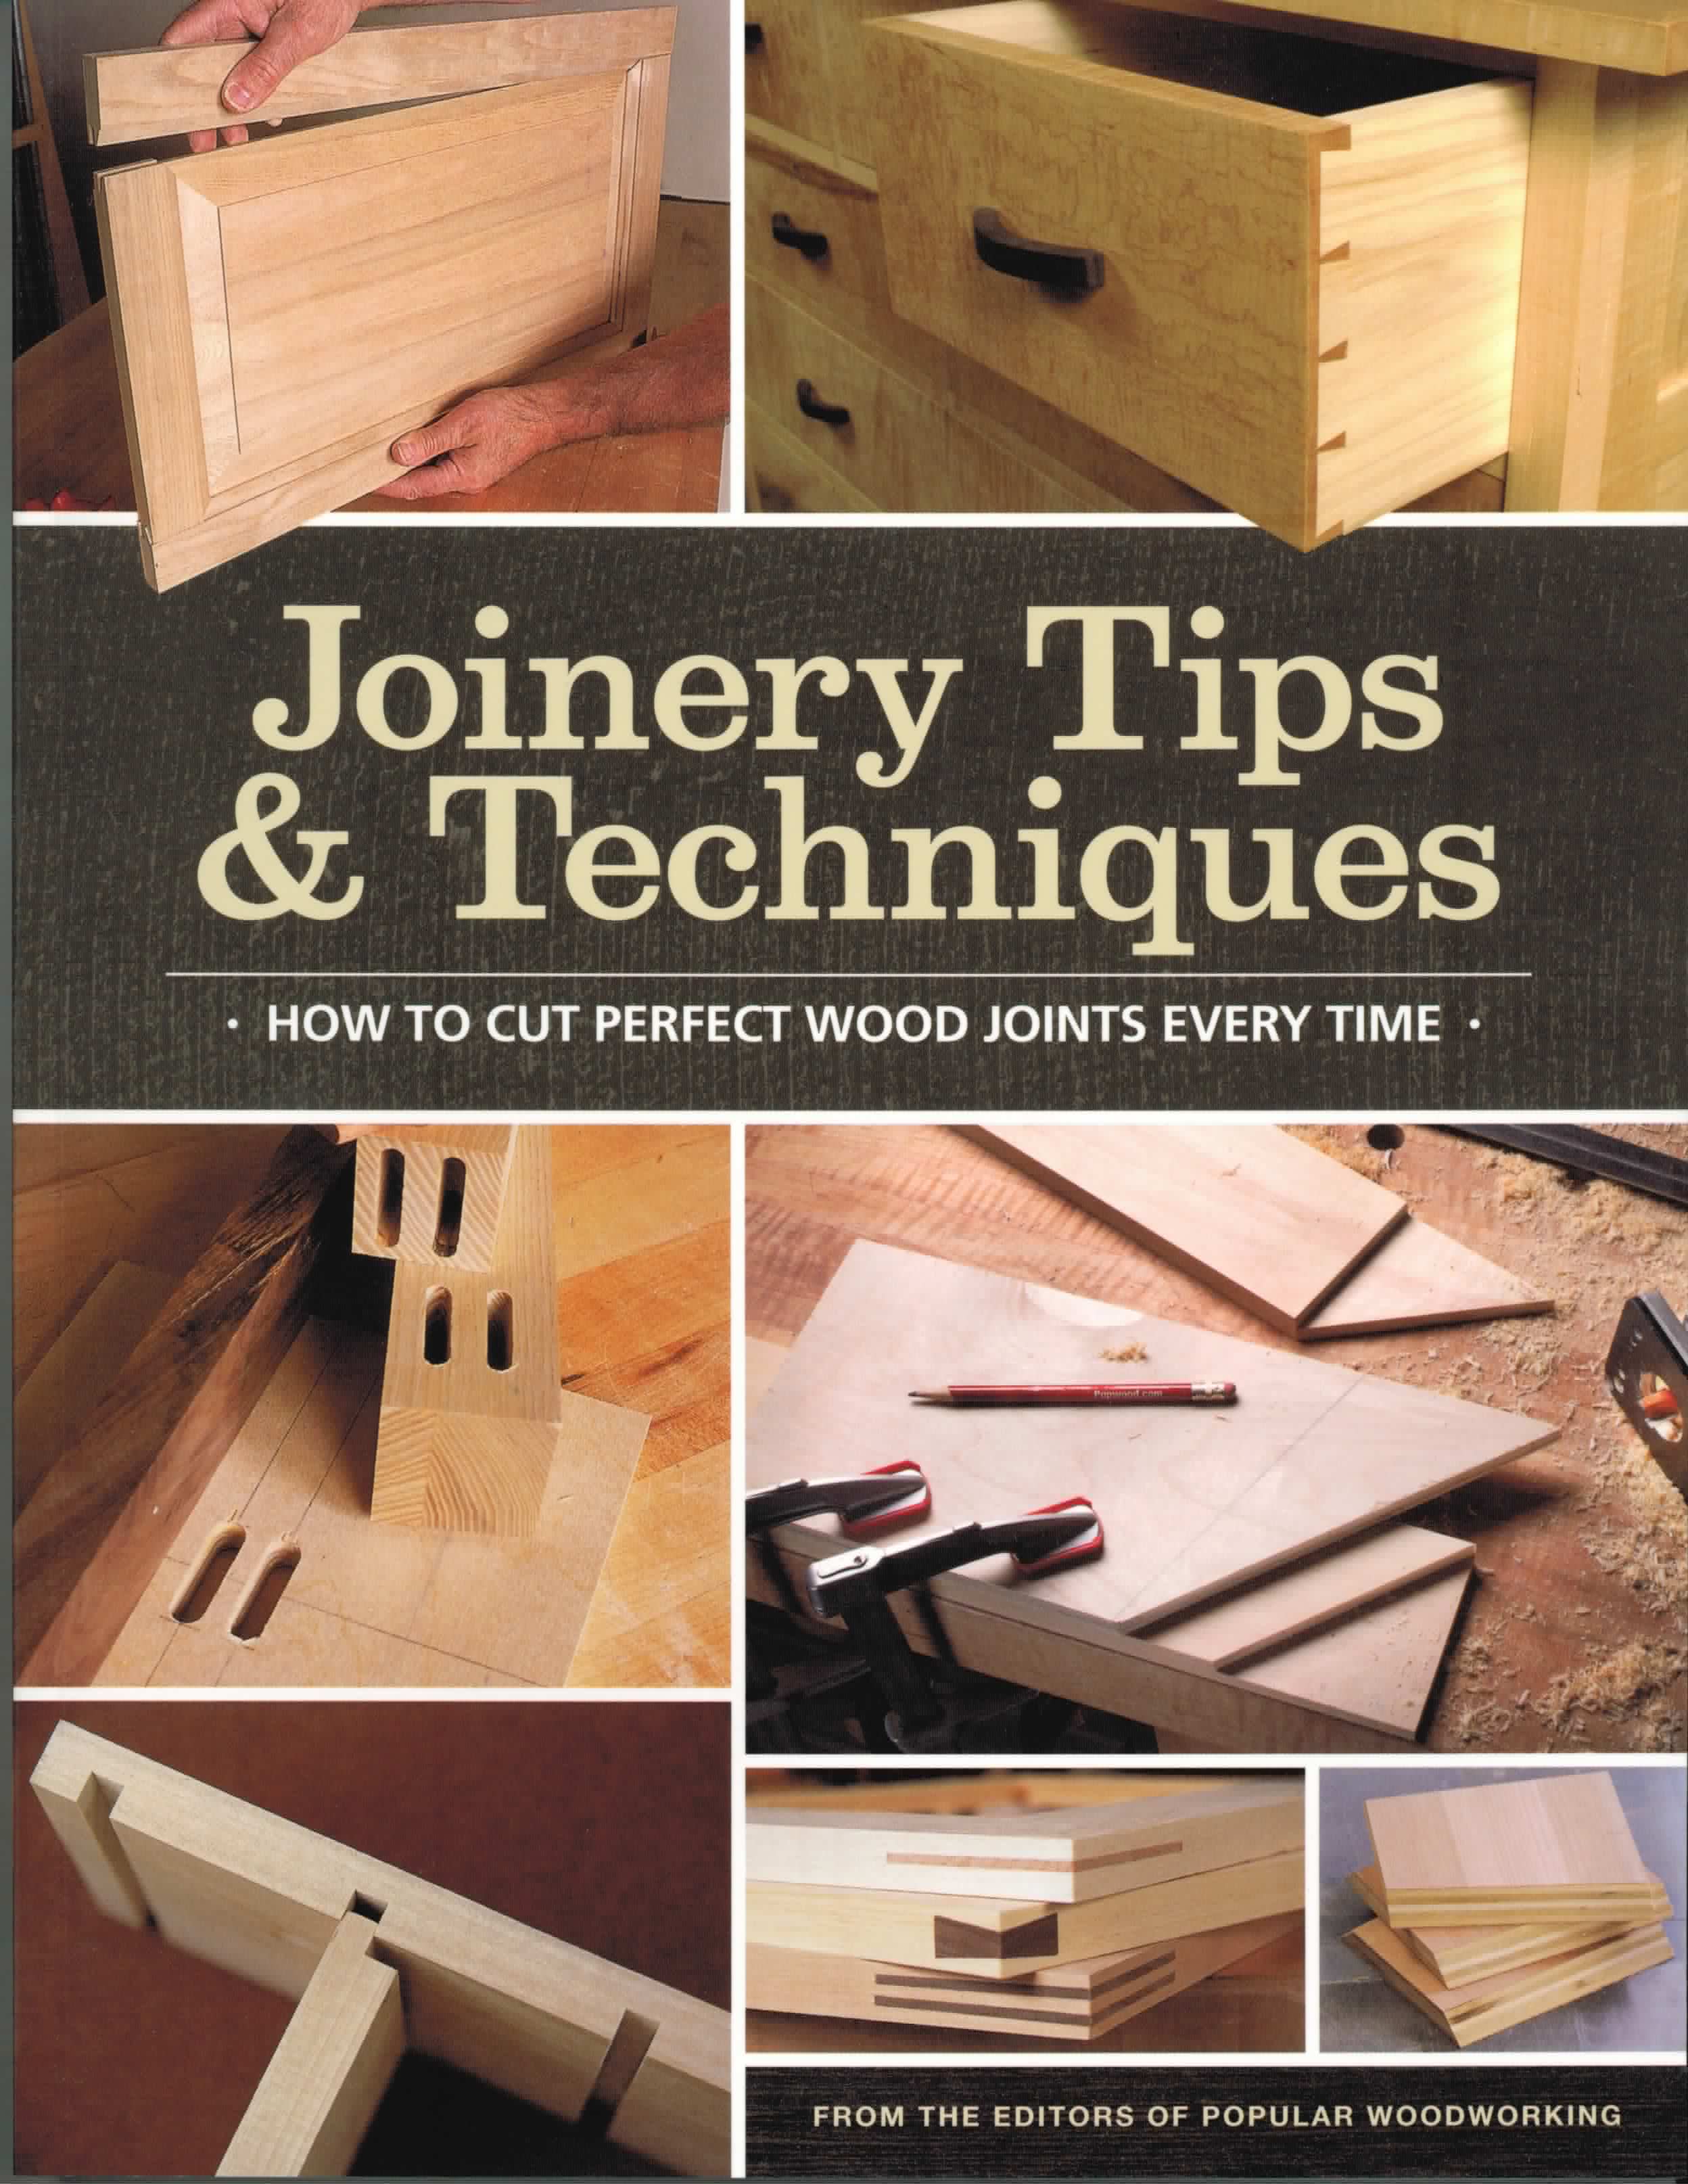 Woodworking how to books